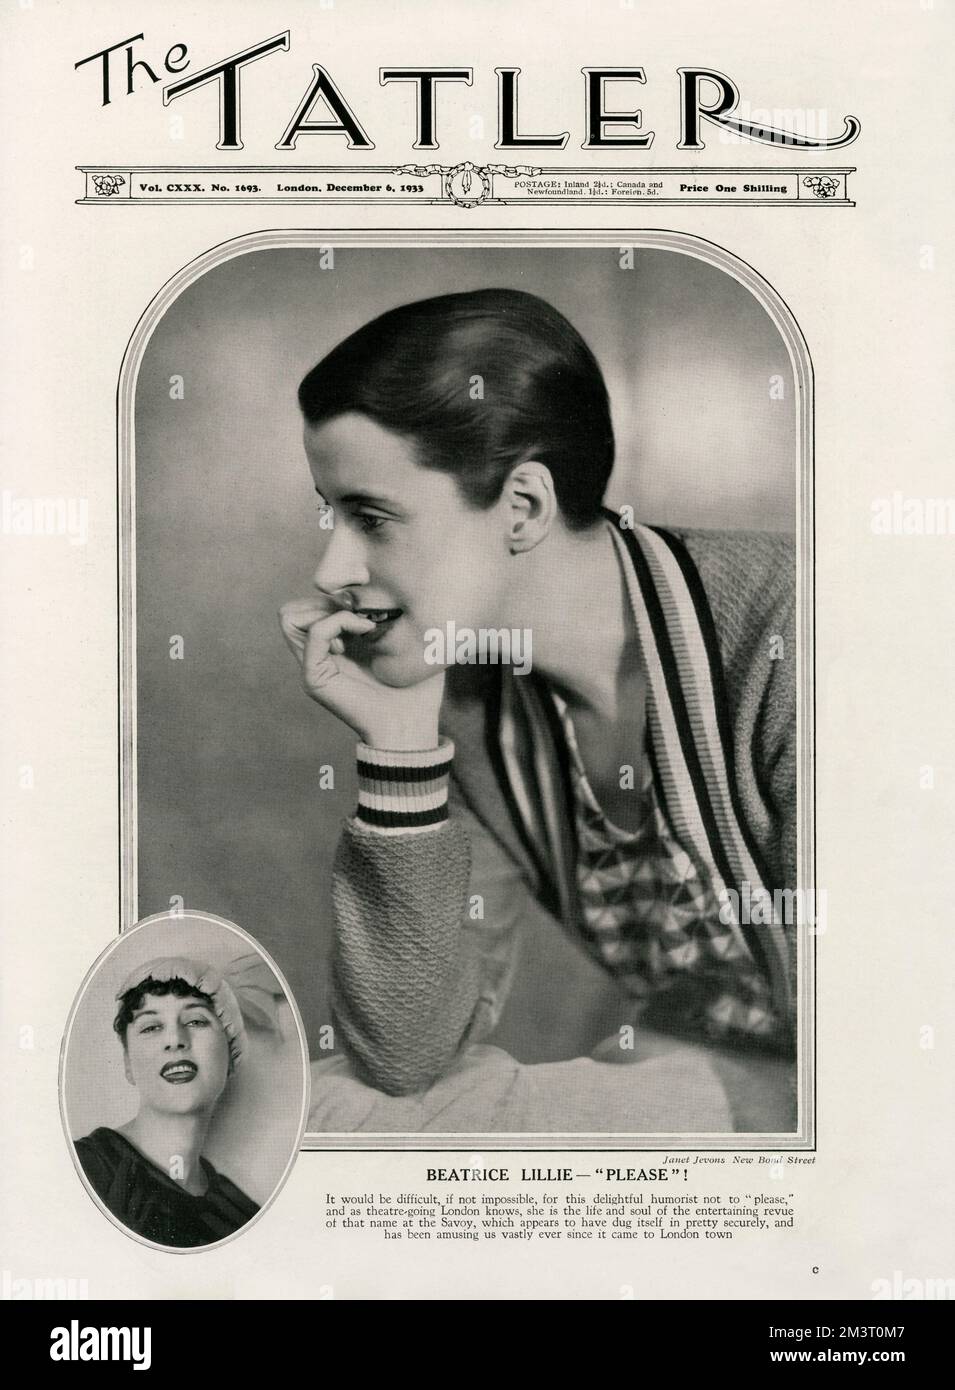 Portrait photograph by Janet Jevons of Beatrice ('Bea') Lillie (1894-1989) on the cover of 'The Tatler', December 6, 1933 - Lillie (featured inset in costume) was at the time starring in 'Please'! revue, London Savoy Stock Photo